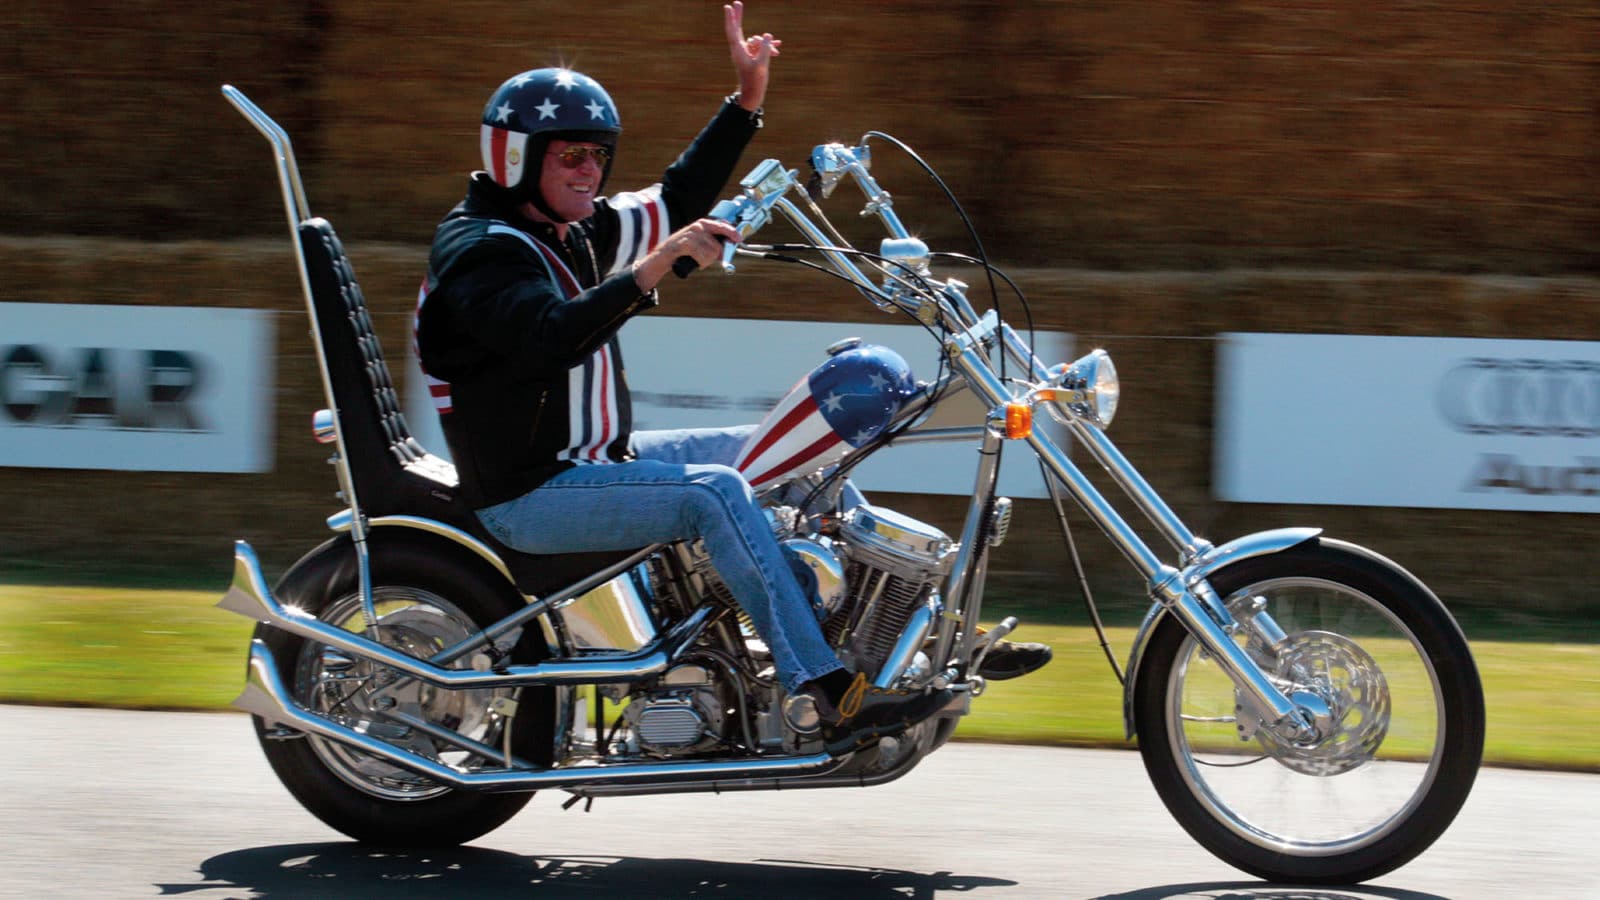 Peter Fonda rides a Harley Davidson at the Goodwood Festival of Speed